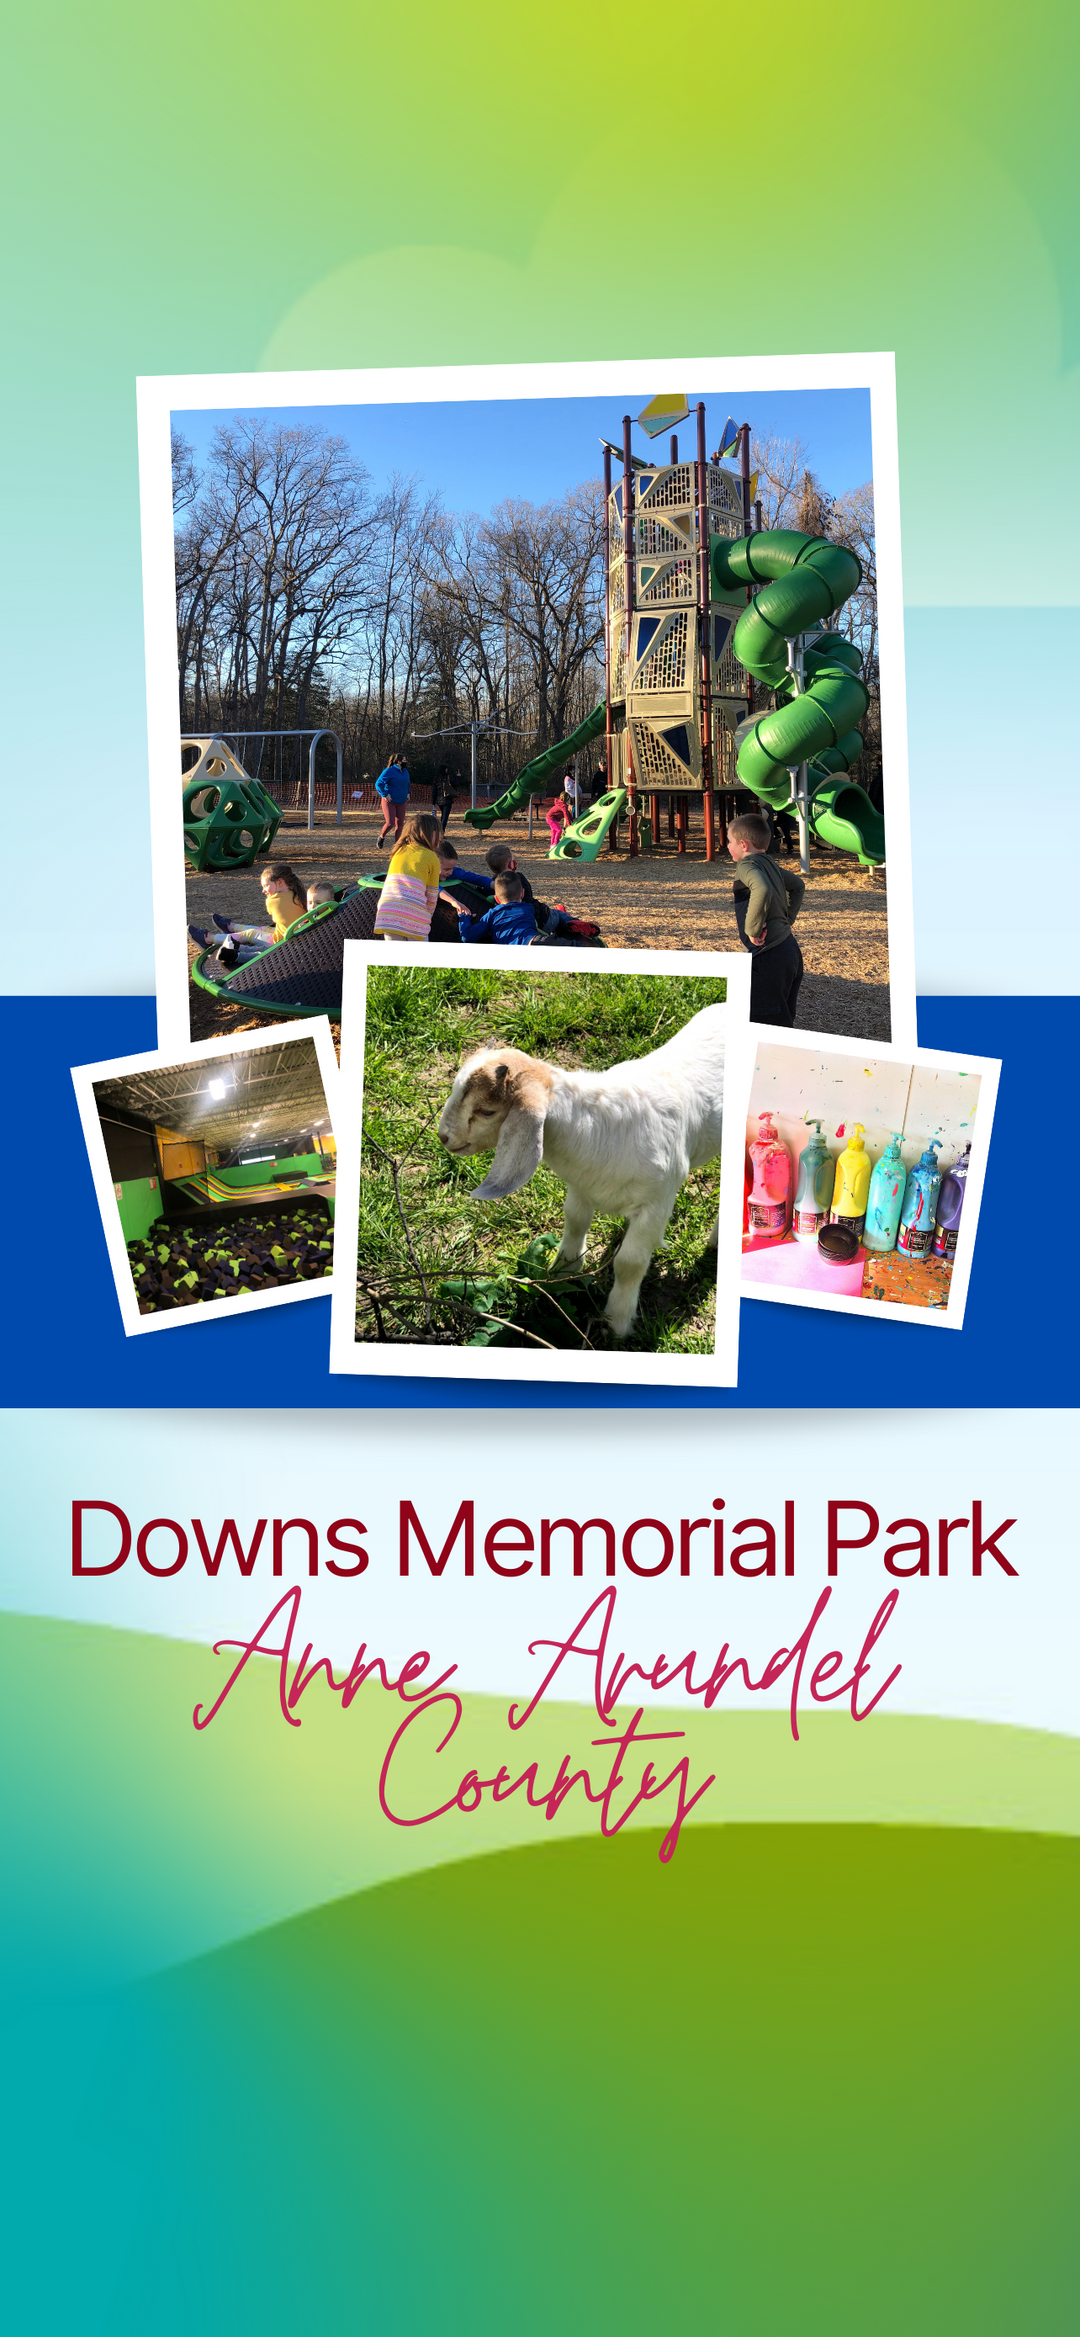 Downs Memorial Park Day Trip Itinerary